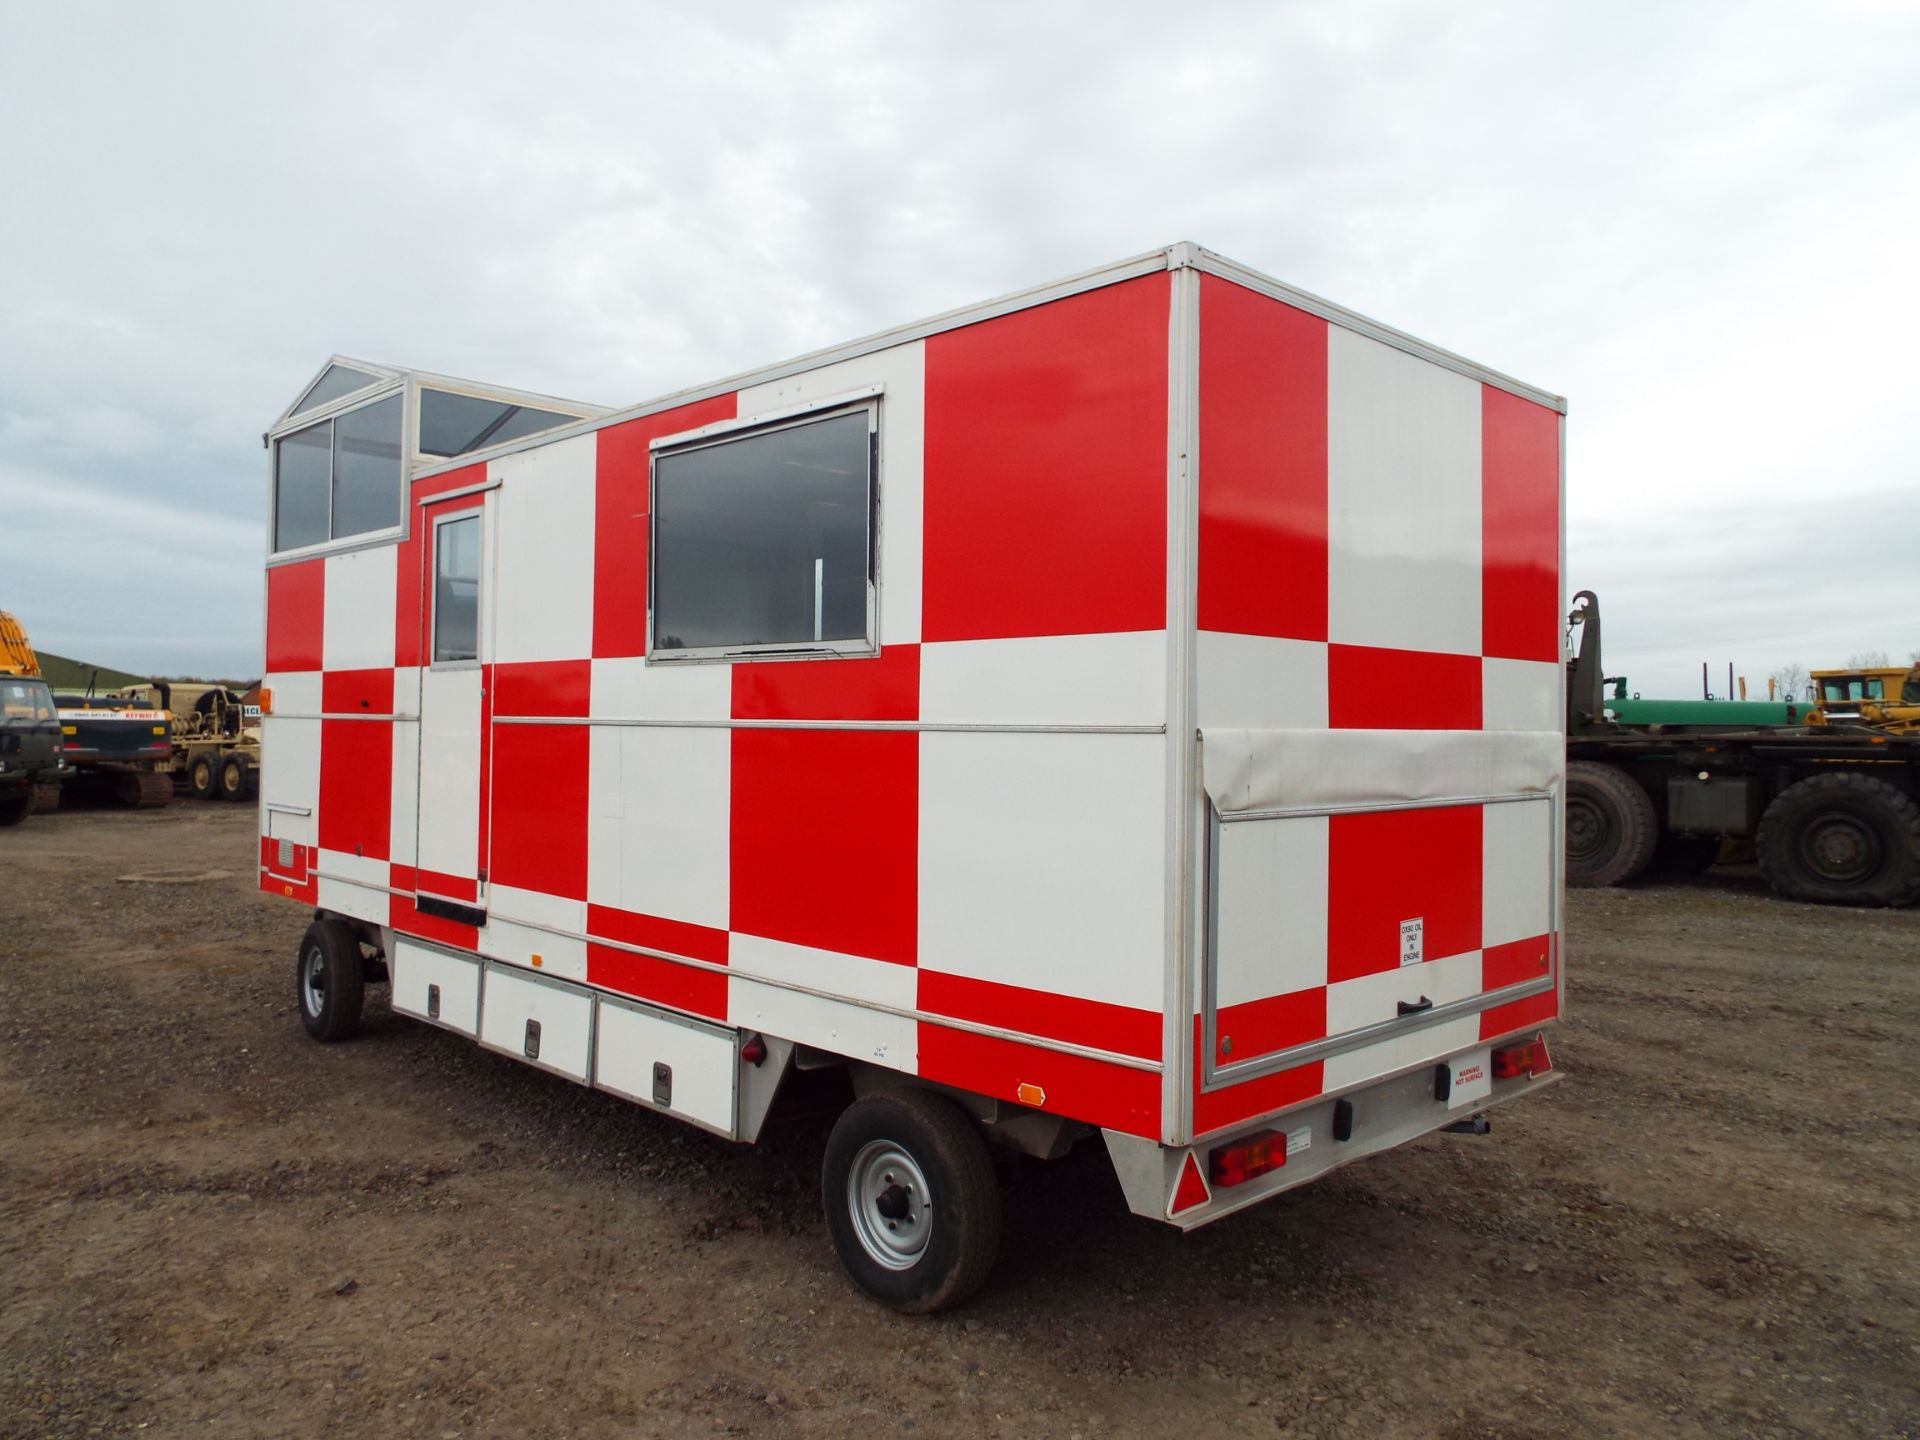 Mobile Observation and Command Centre - Image 4 of 53